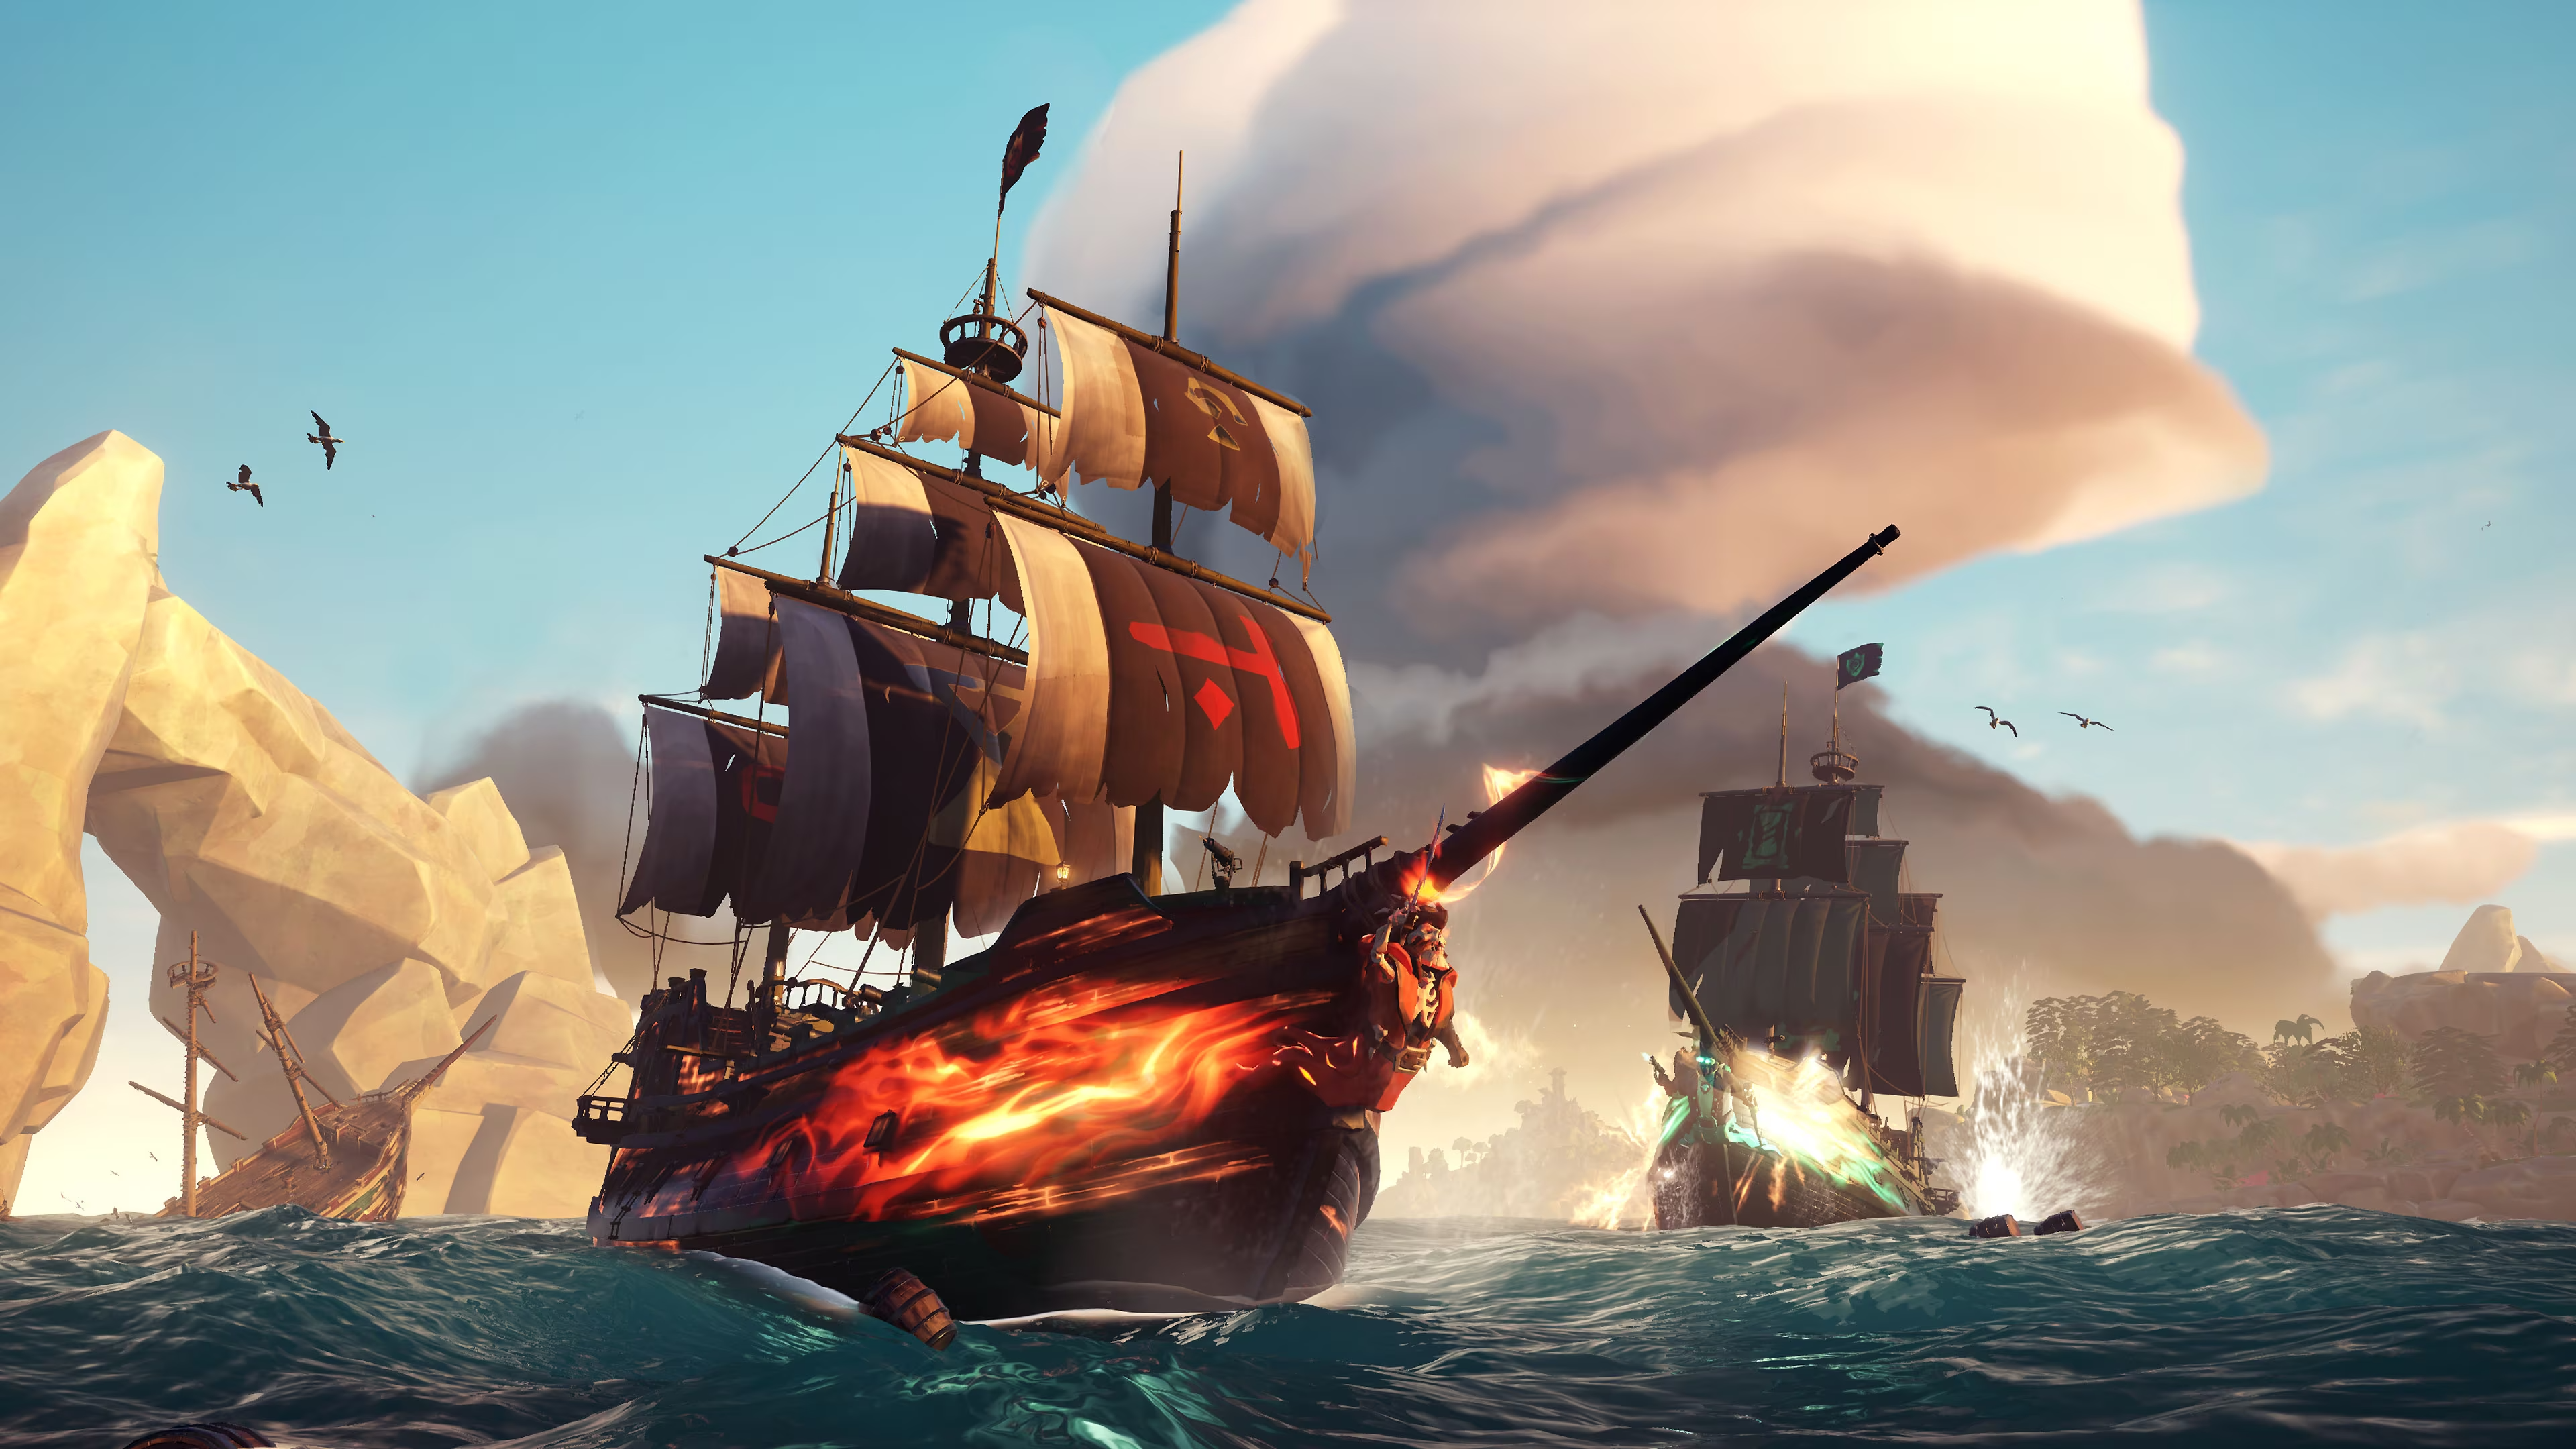 Still, it doesn't matter: Sea of Thieves became the most downloaded game on PlayStation 5 in May